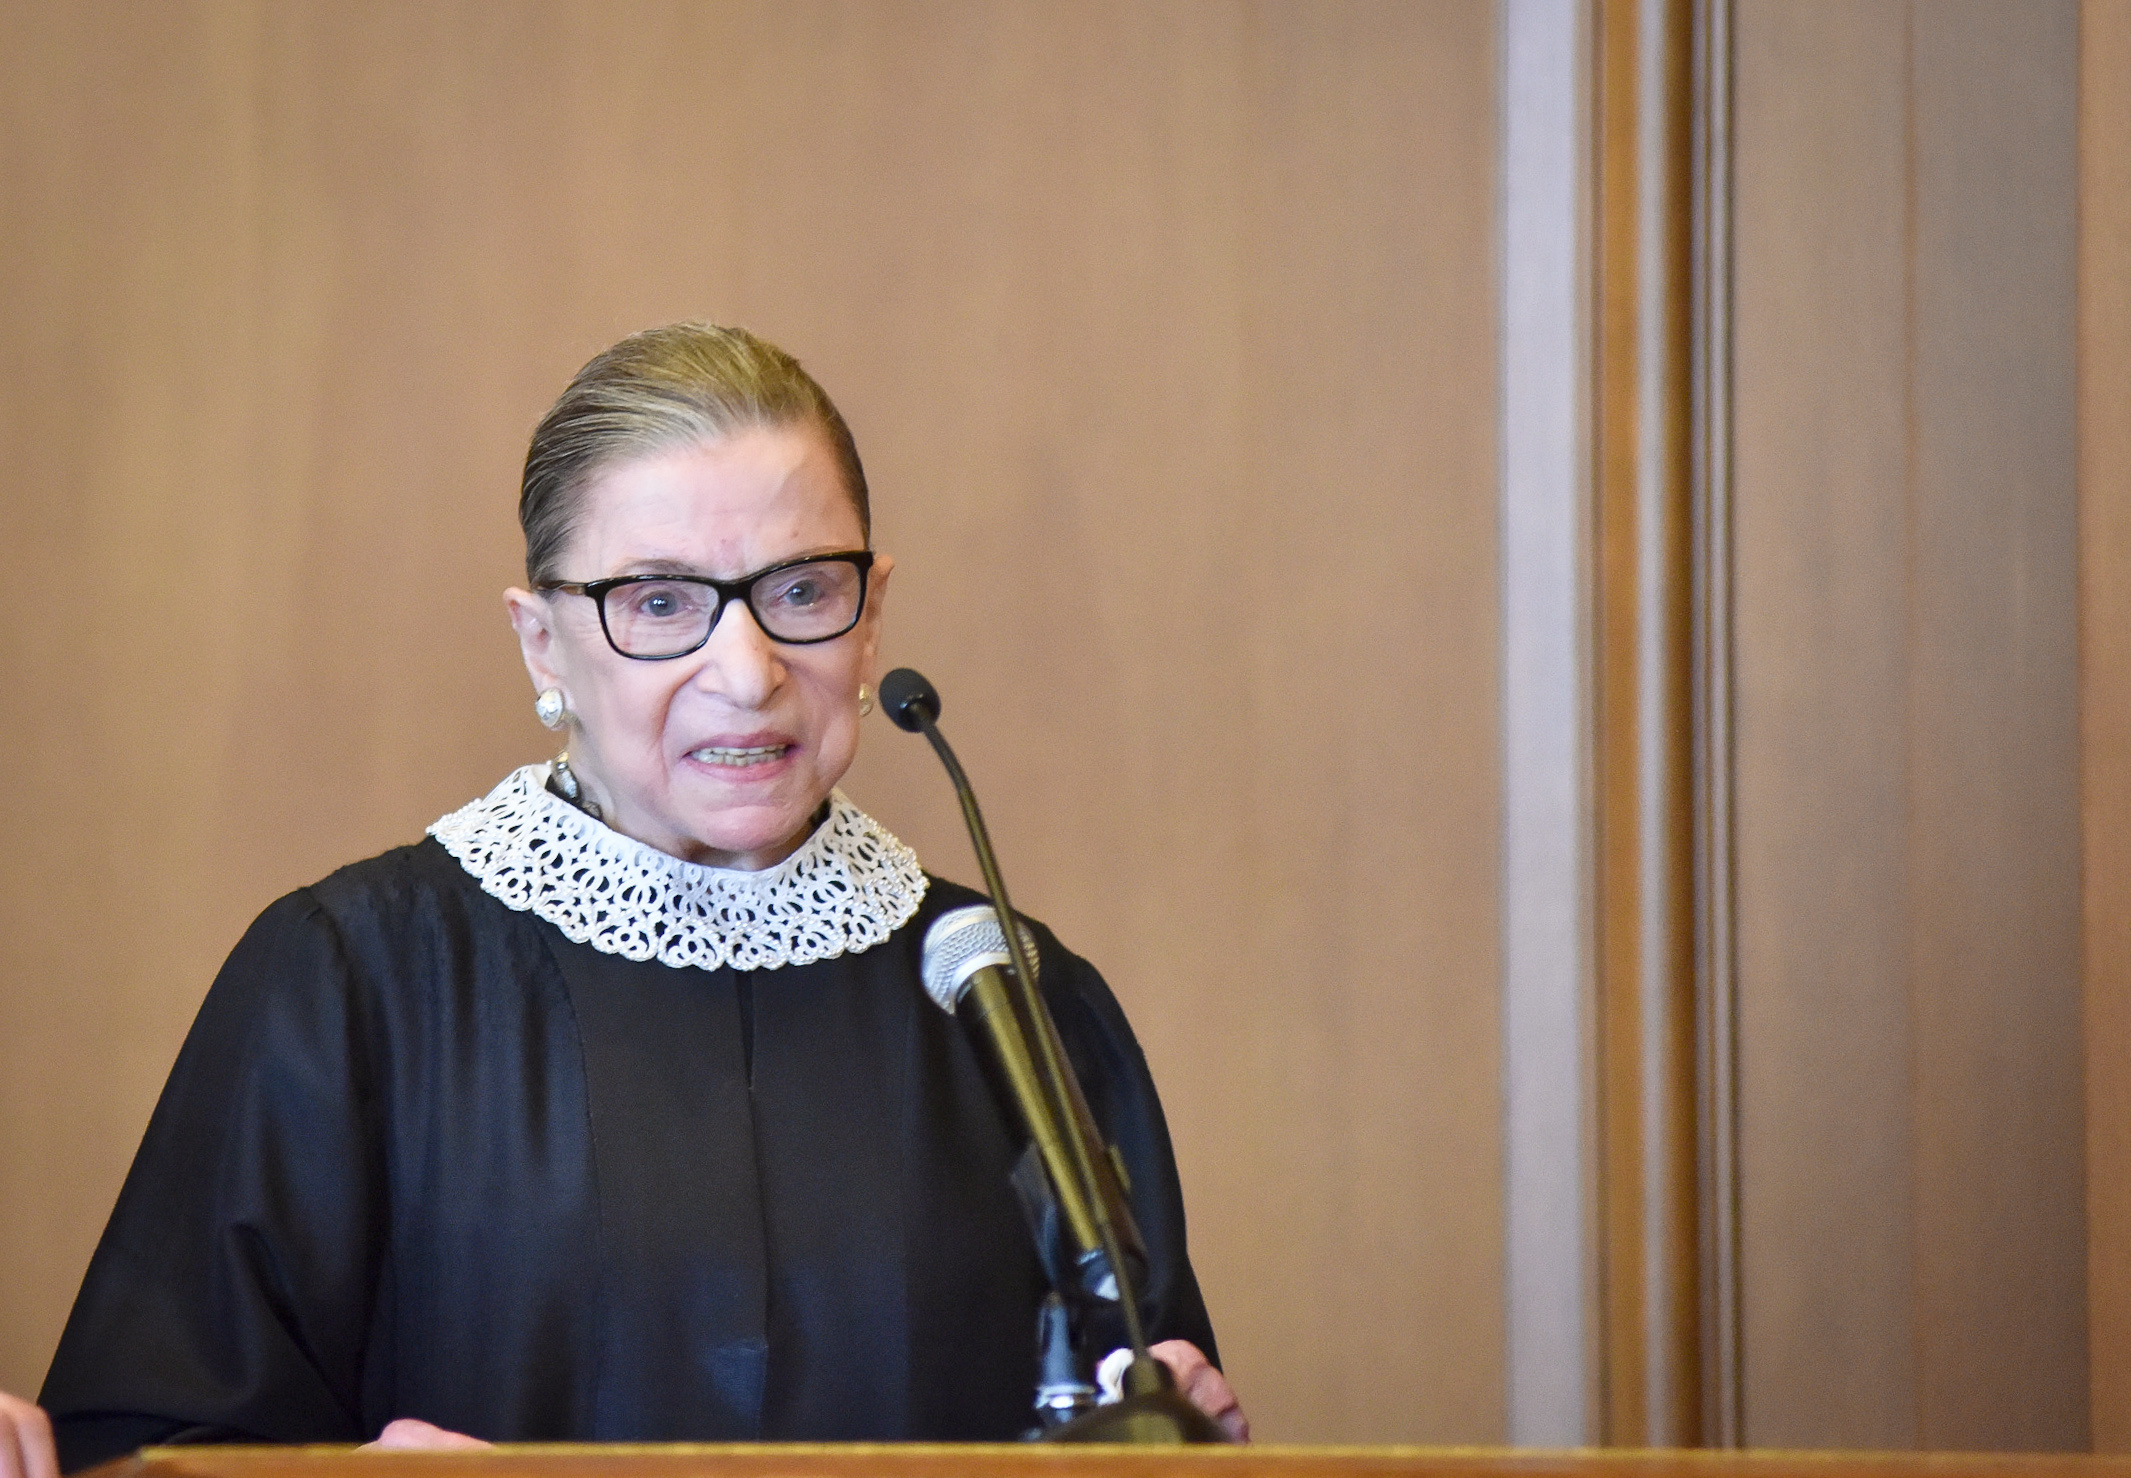 Ruth Bader Ginsburg “will retire from the U.S. Supreme Court in January, 2019” says same news source that accurately reported her cancer